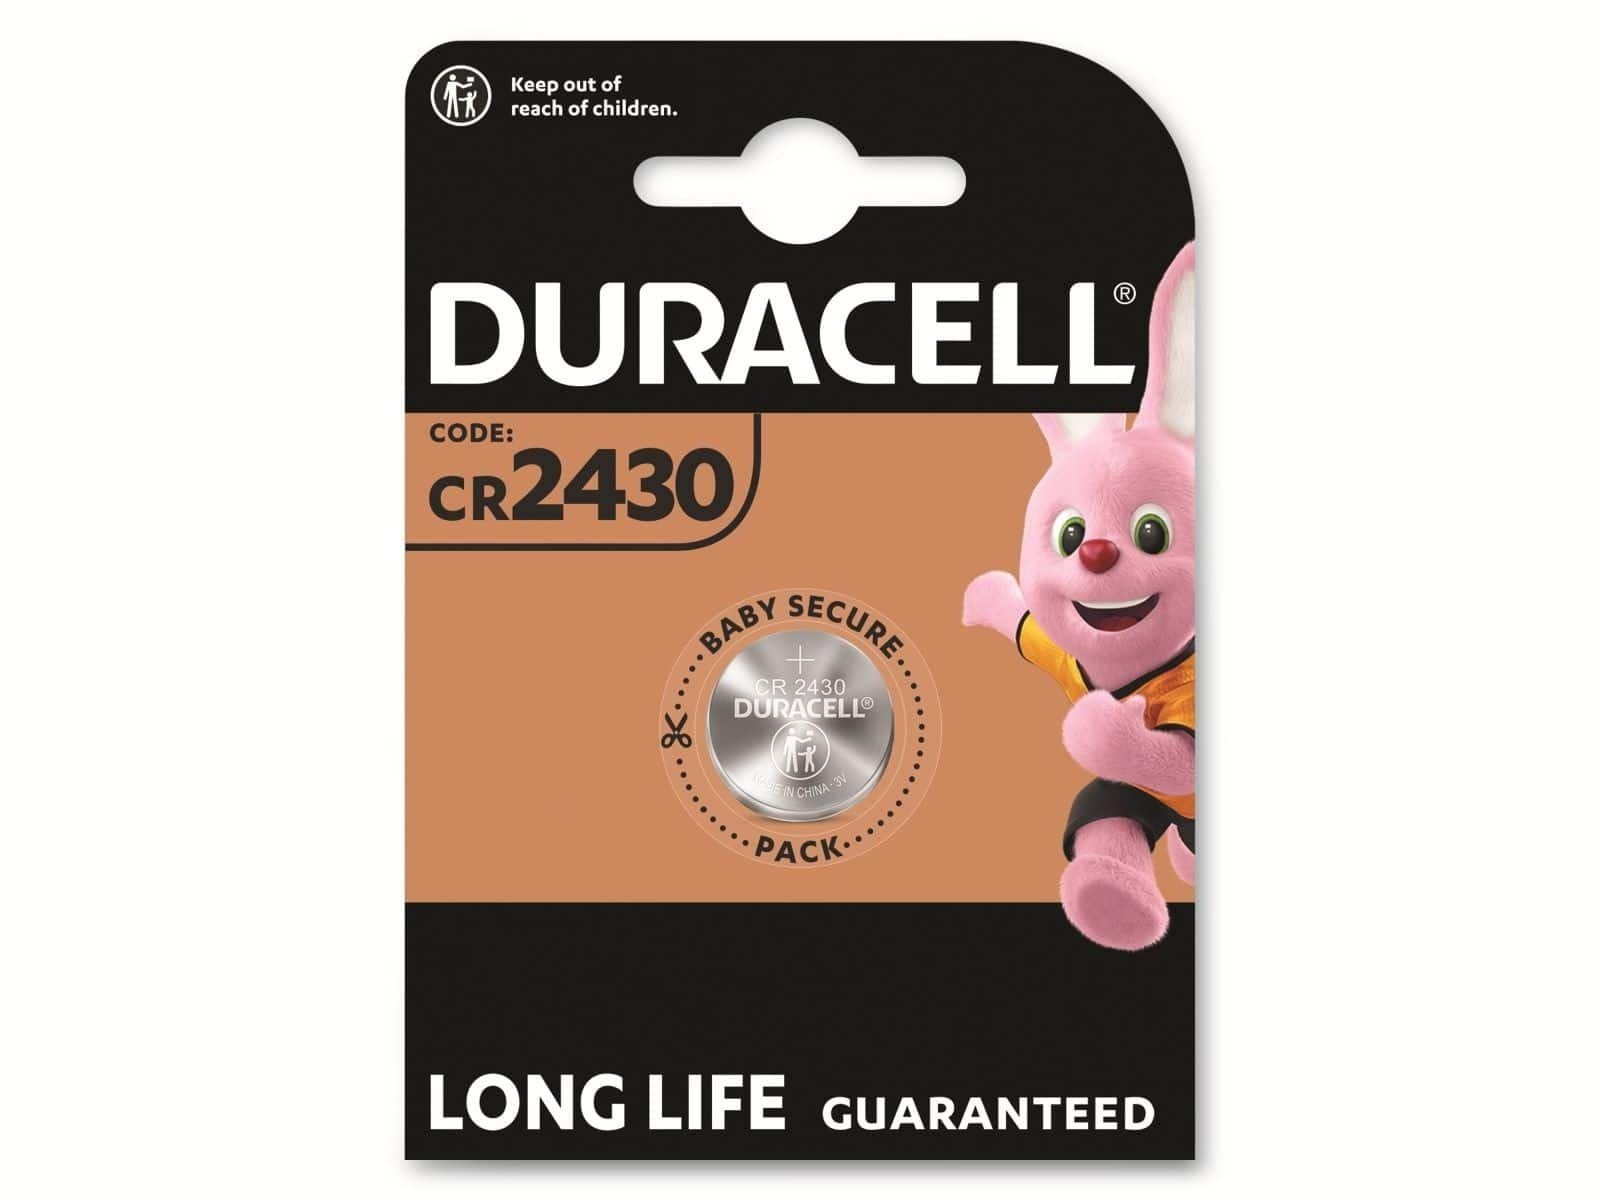 Duracell DURACELL Lithium-Knopfzelle CR2430, 3V Knopfzelle